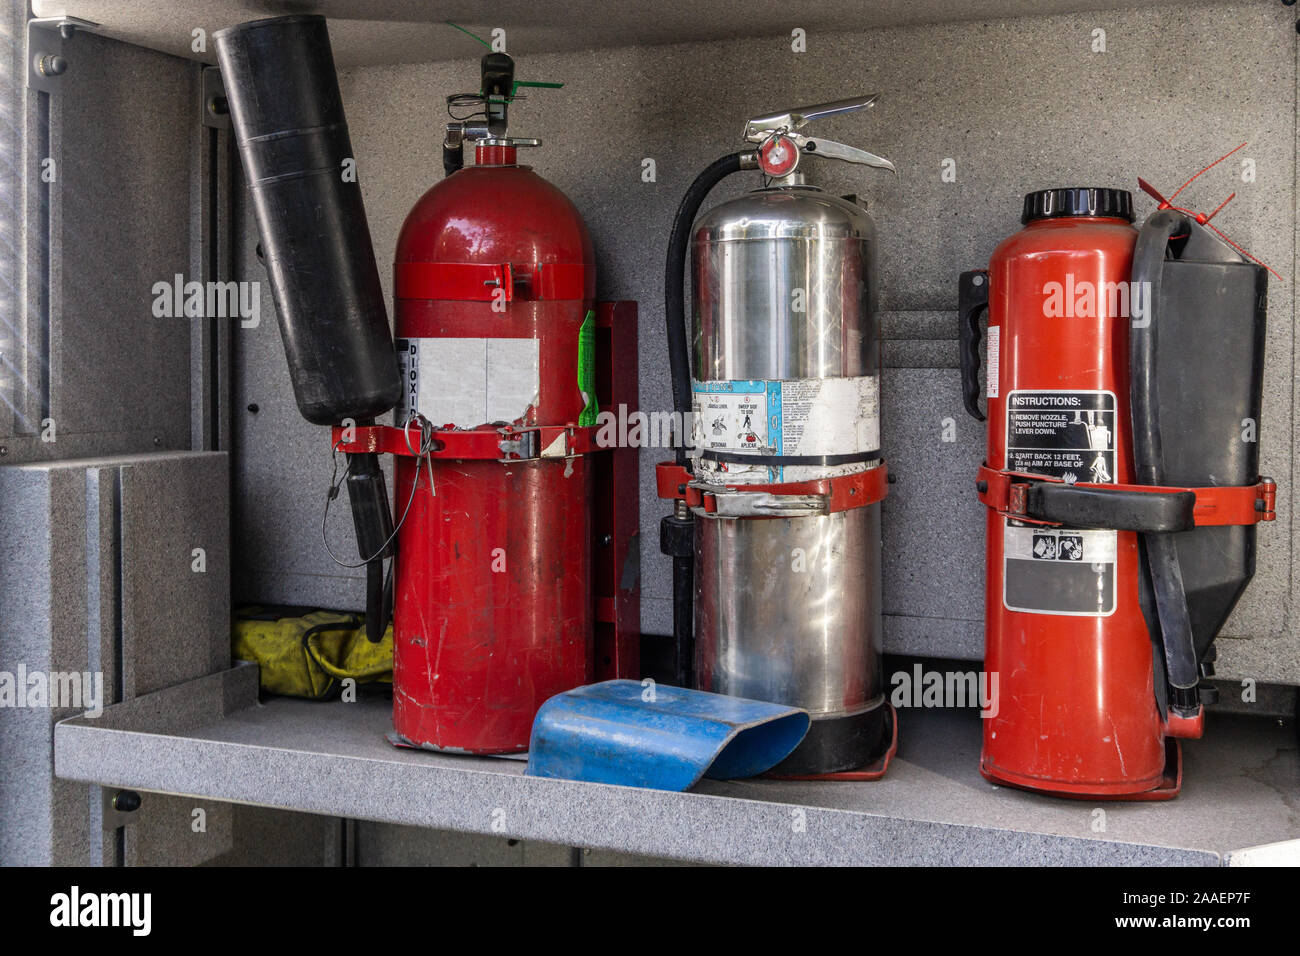 Fire extinguisher in fire truck side compartment. Stock Photo